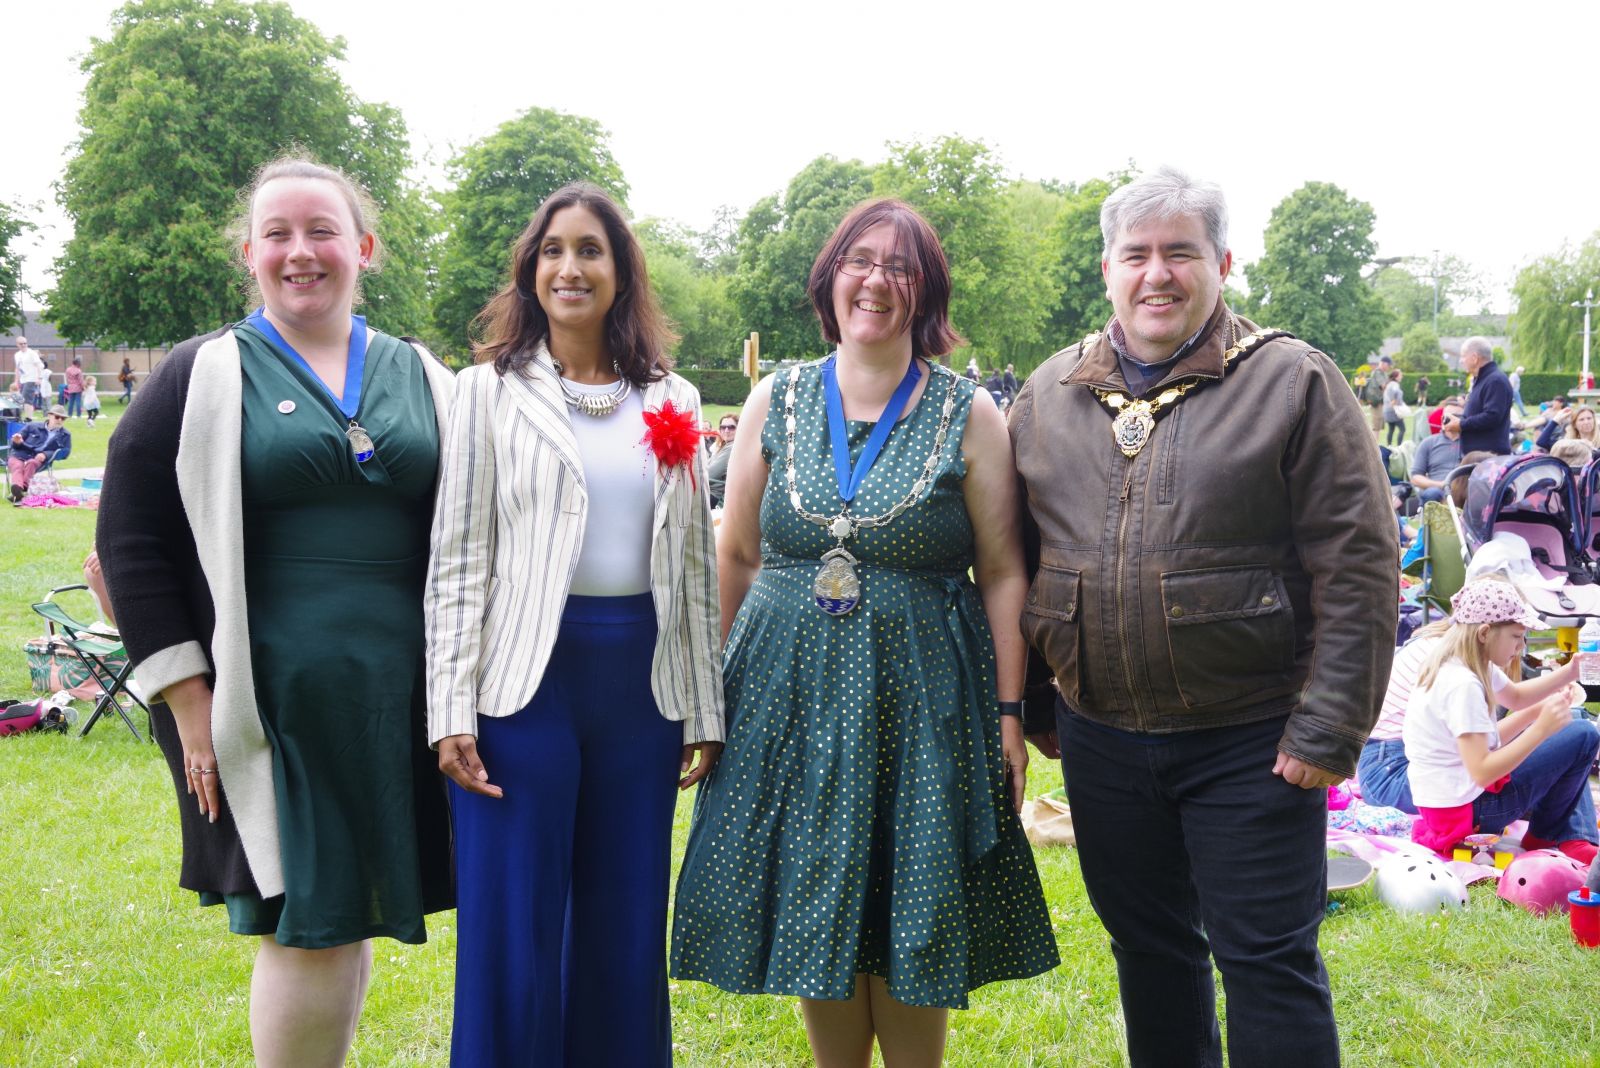 Left to right: Councillor Hannah Avery, MP Claire Coutinho, Councillor Samantha Marshall and Councillor Frank Kelly